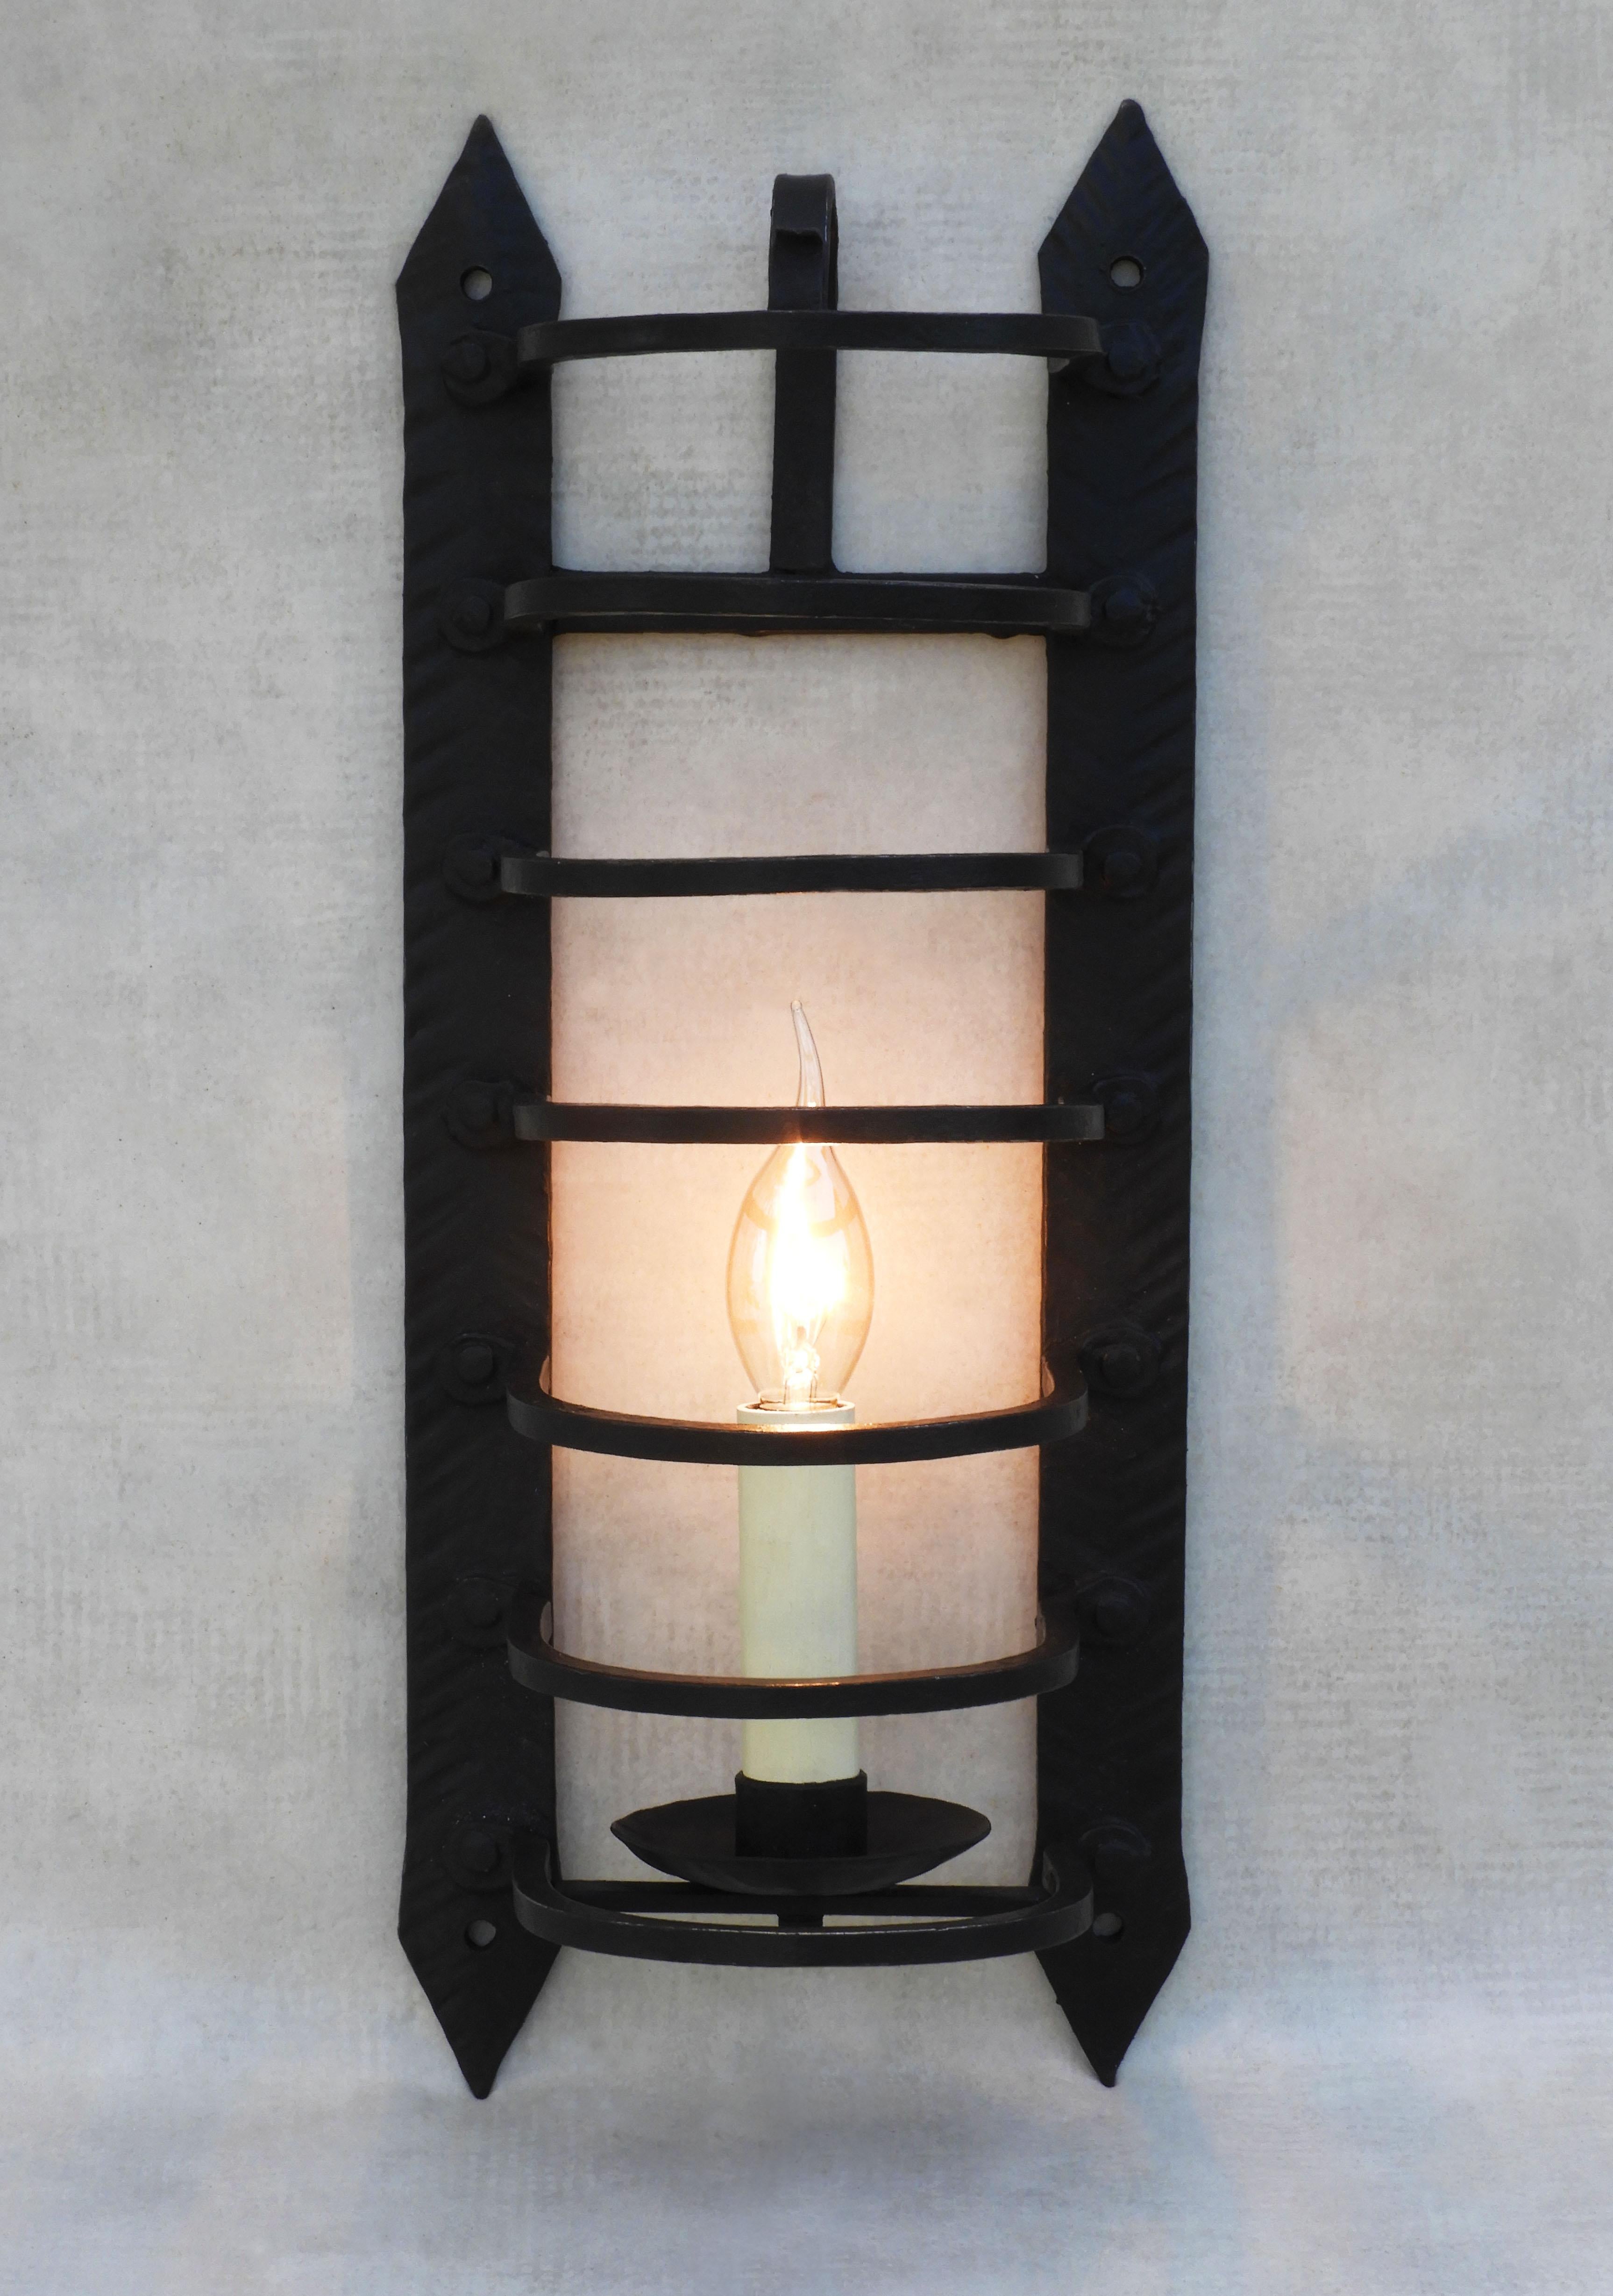 20th Century French Wrought Iron Caged Wall Light Sconce, circa 1900 For Sale